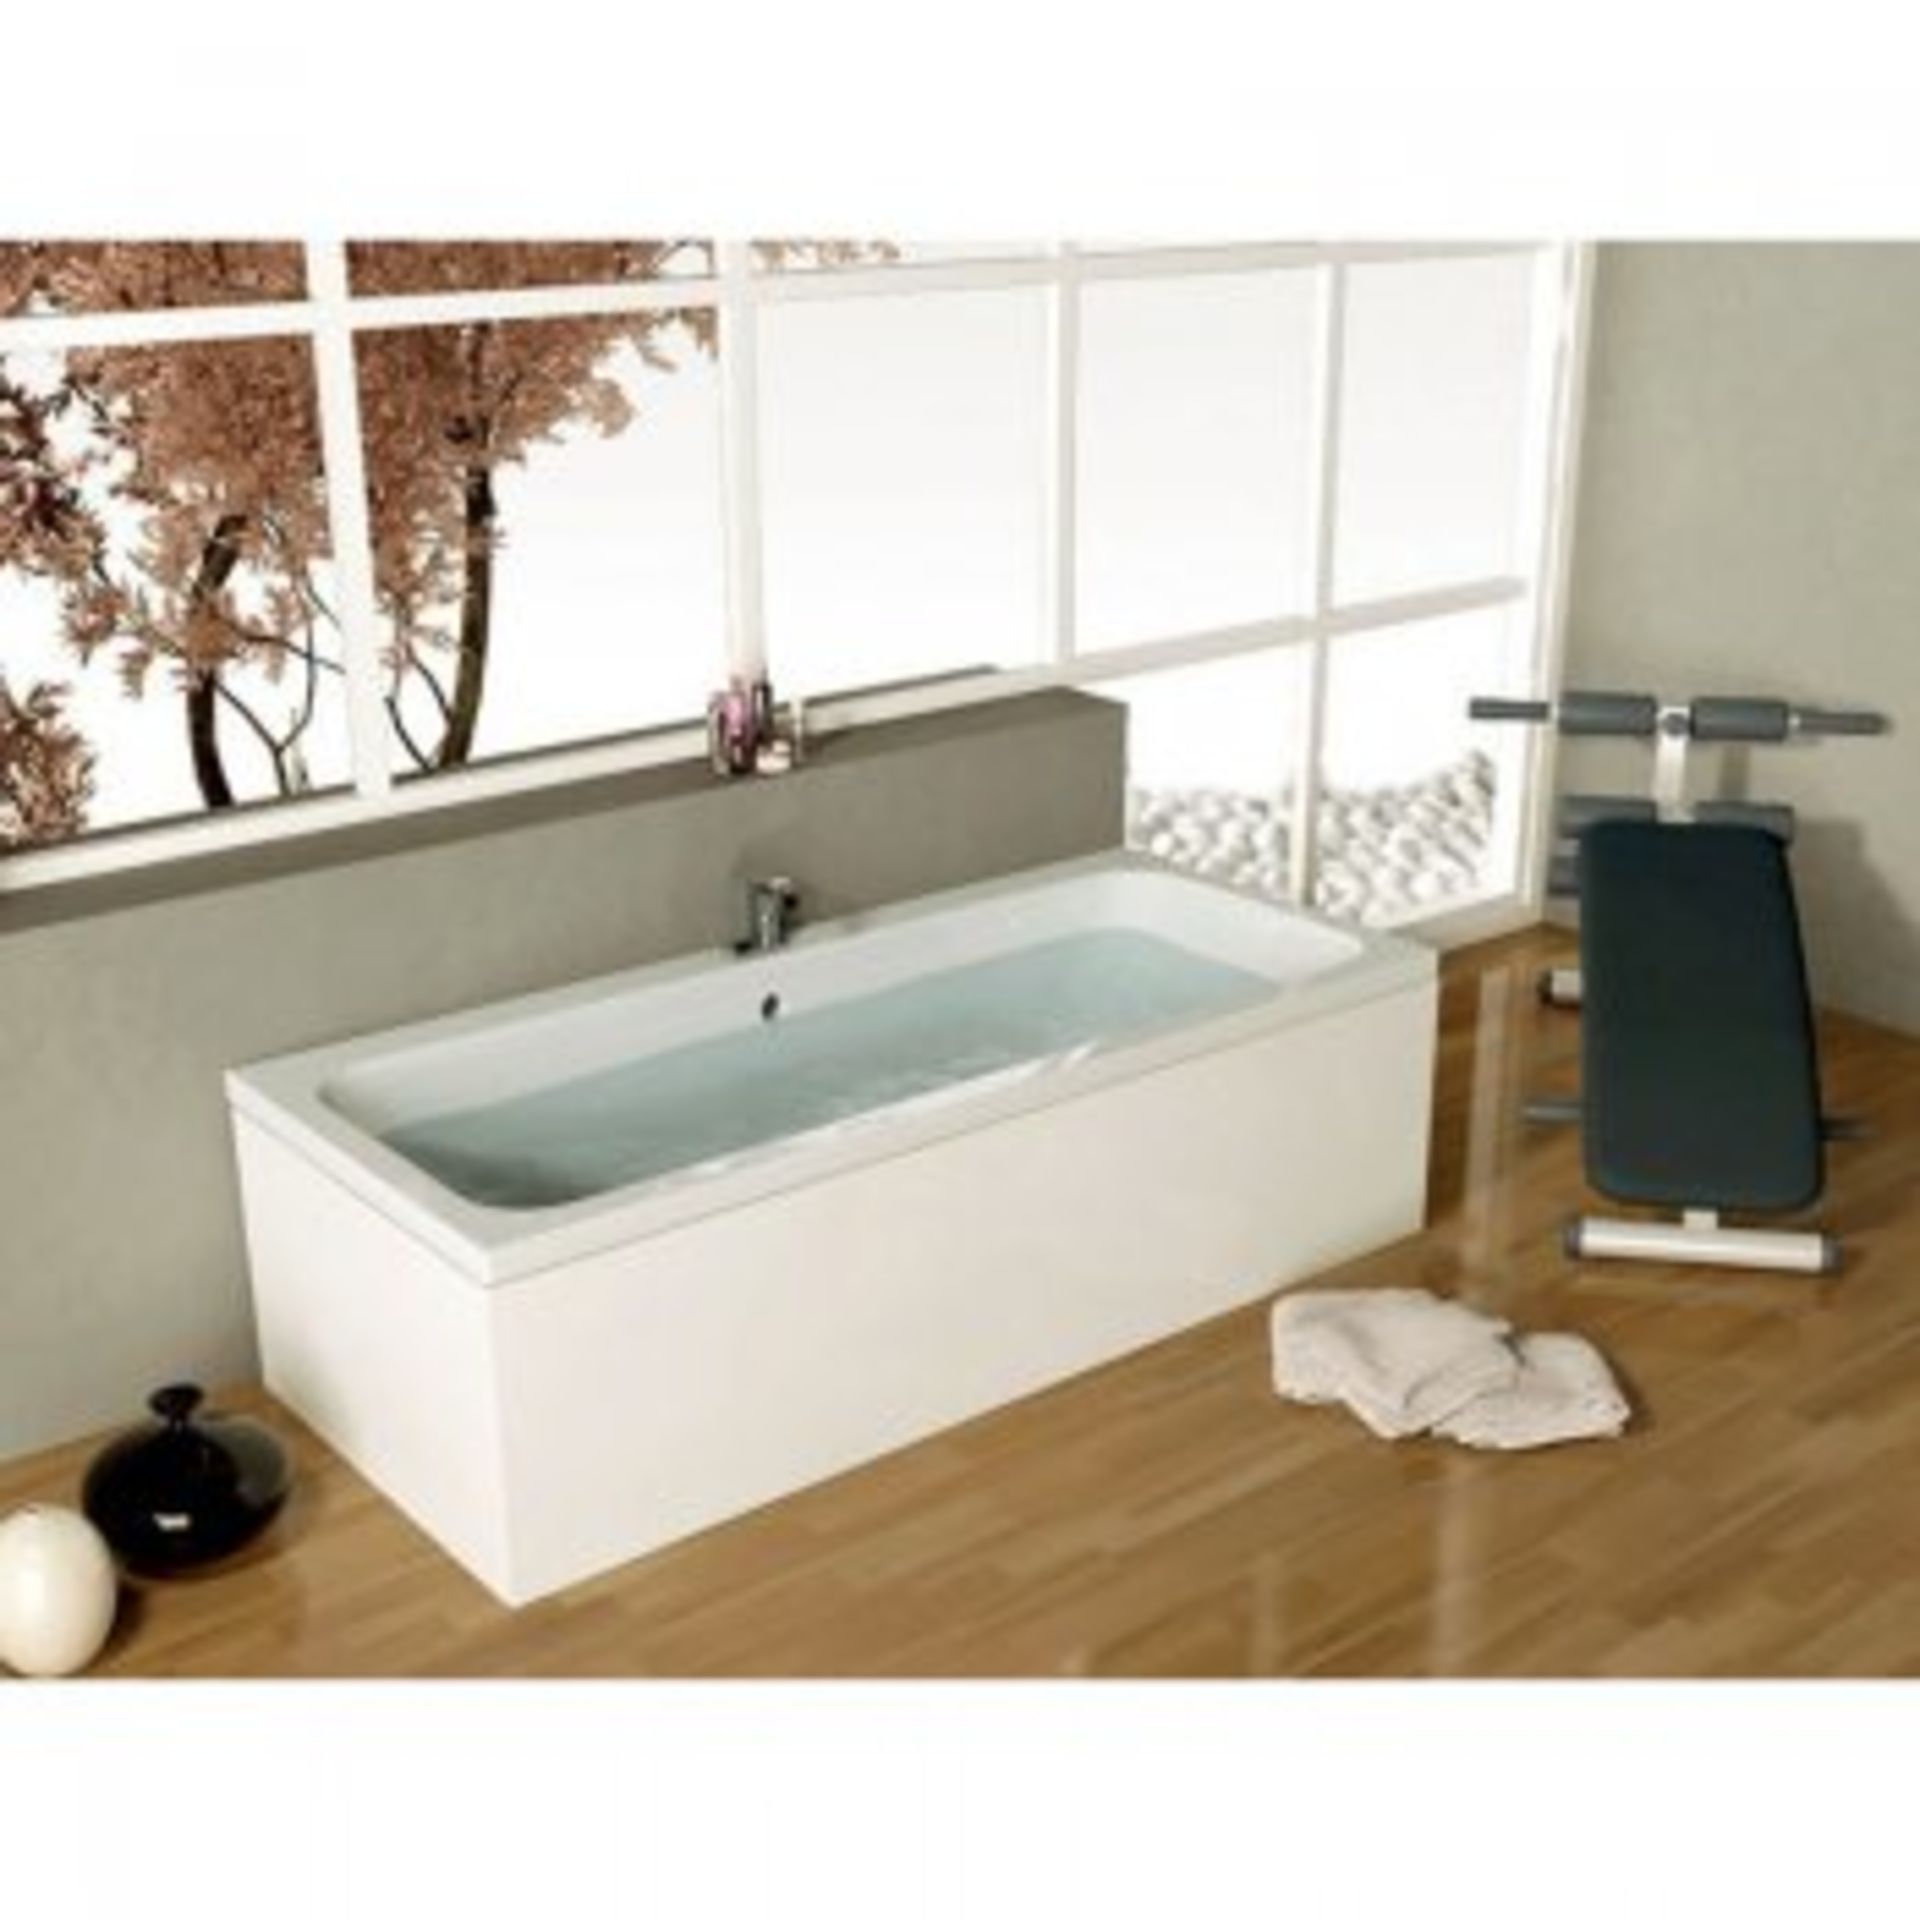 (RC7) 2000x900mm Keramag Deep Double Ended Bath. RRP £627.99. Our range of double ended baths... - Image 4 of 5